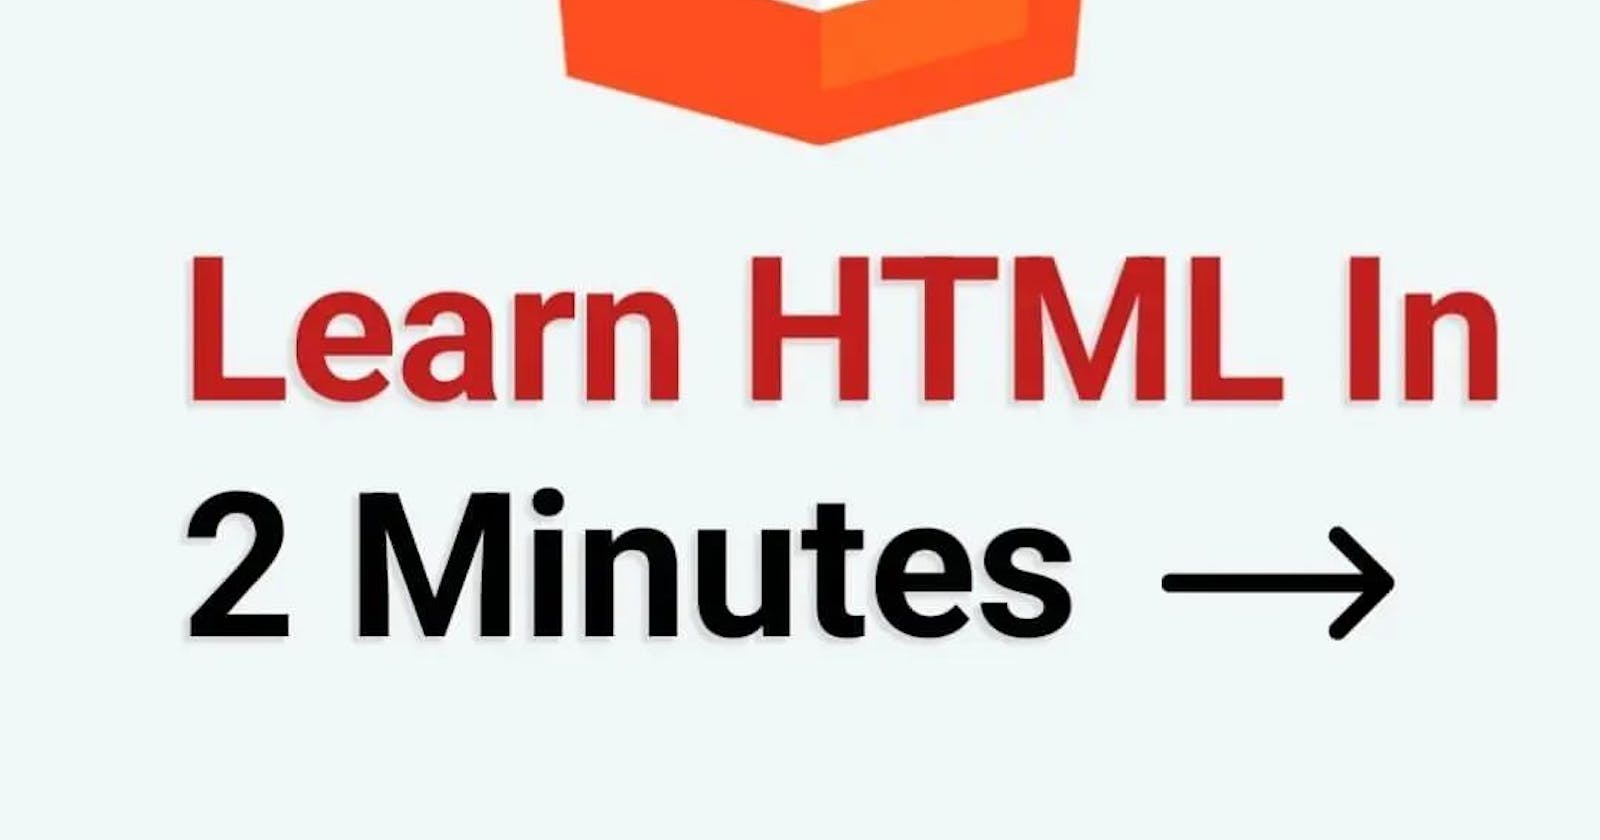 Learn Html in 2 minutes